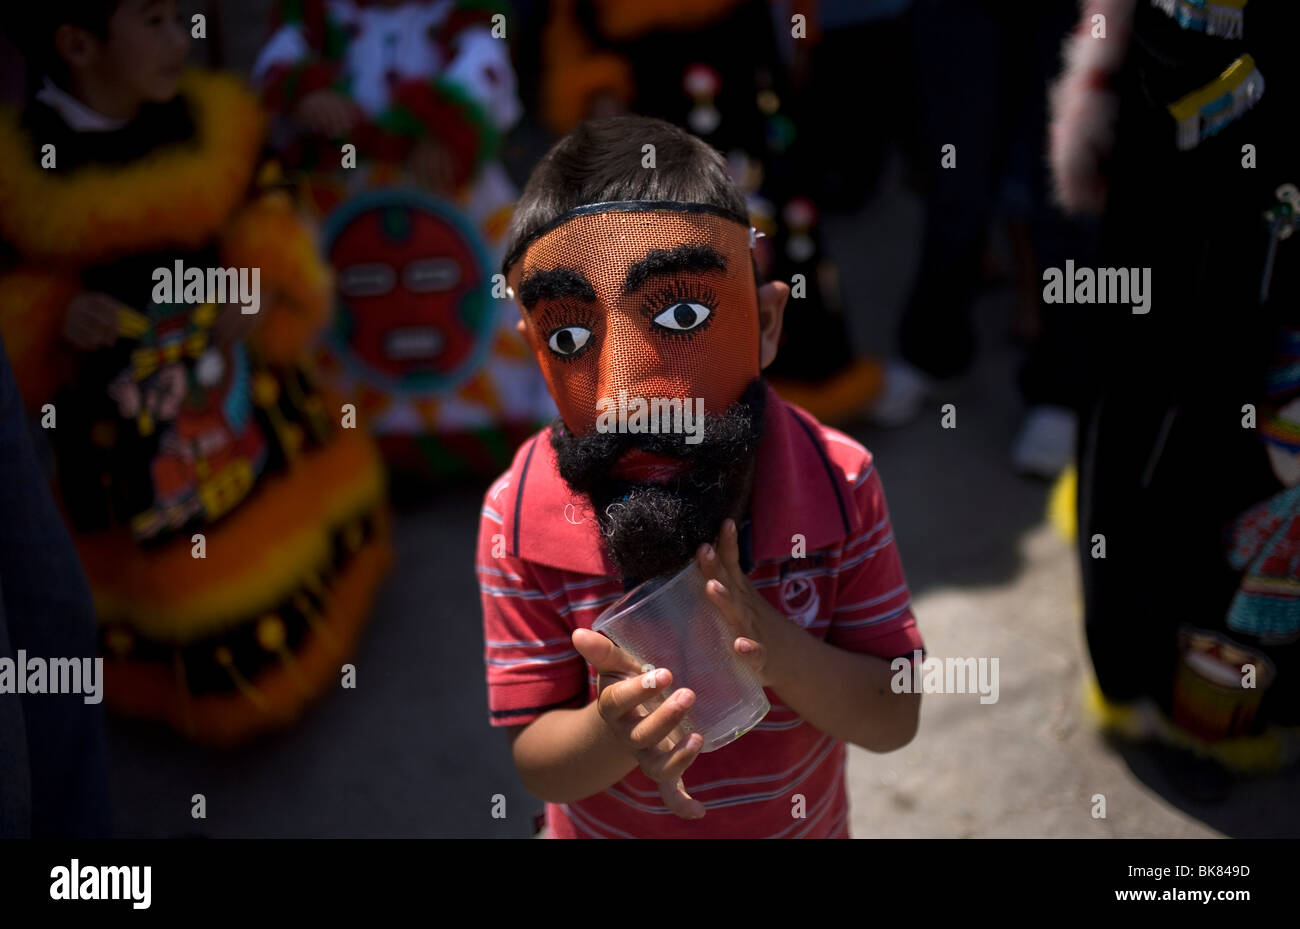 A boy wears a Chinelo mask during Carnival celebrations in Yautepec, Mexico Stock Photo